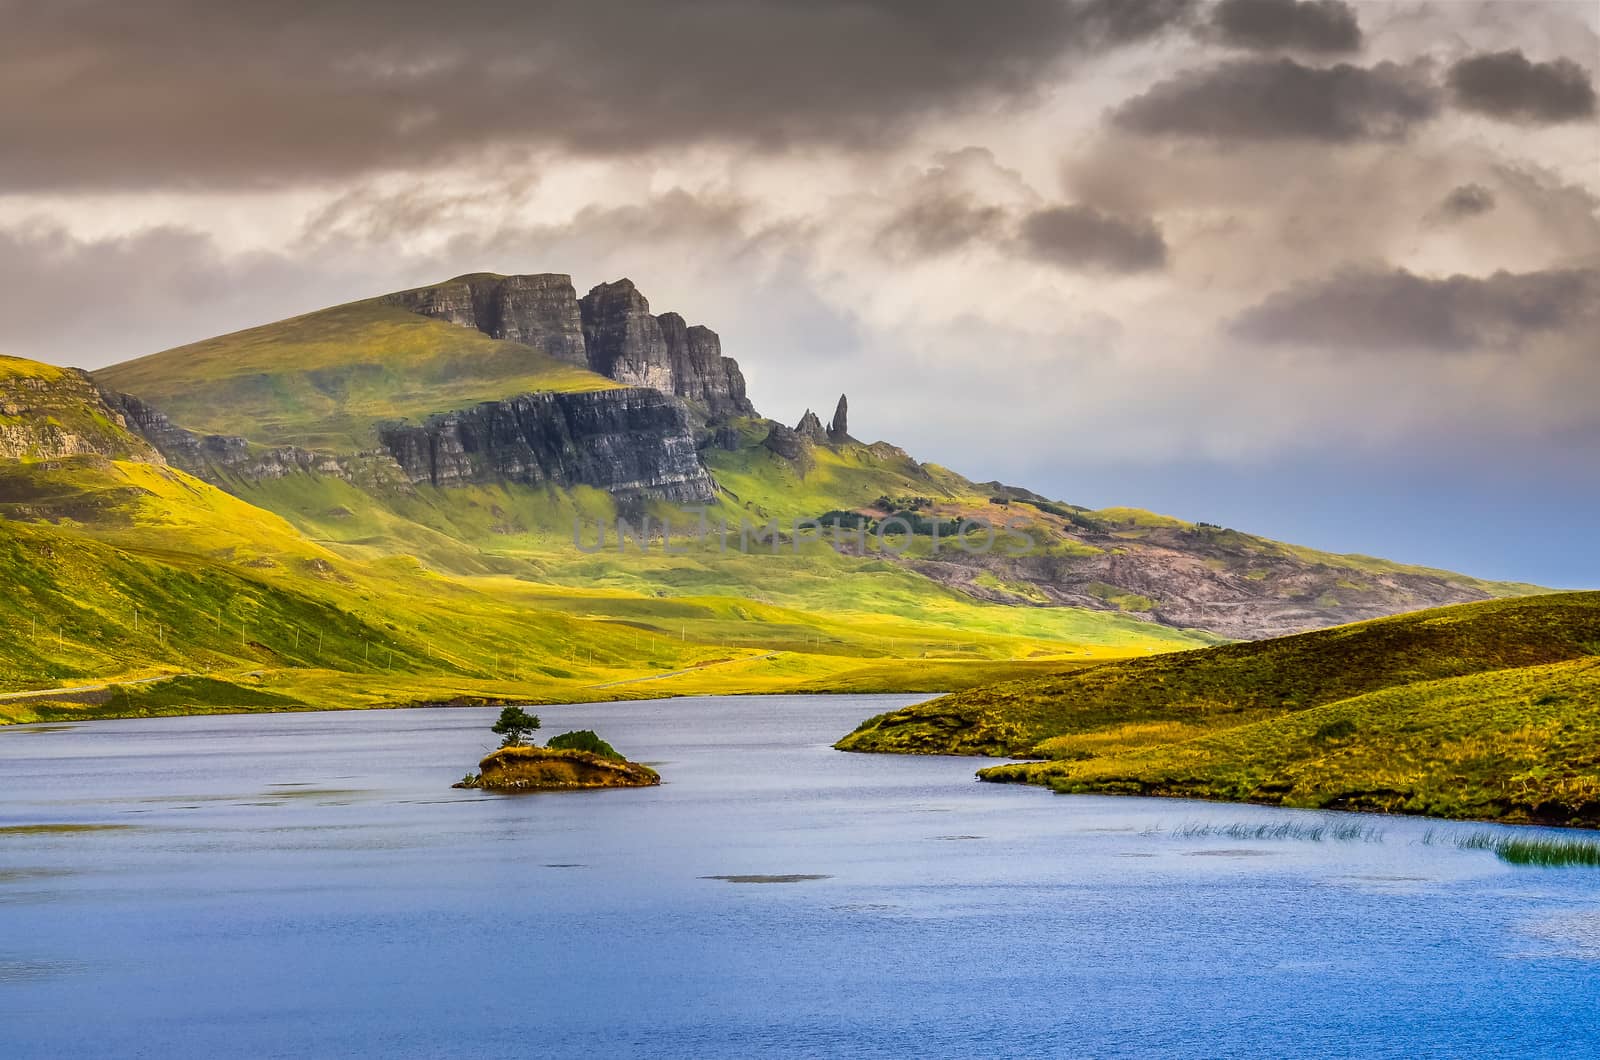 Landscape view of Old Man of Storr rock formation and lake, Scot by martinm303